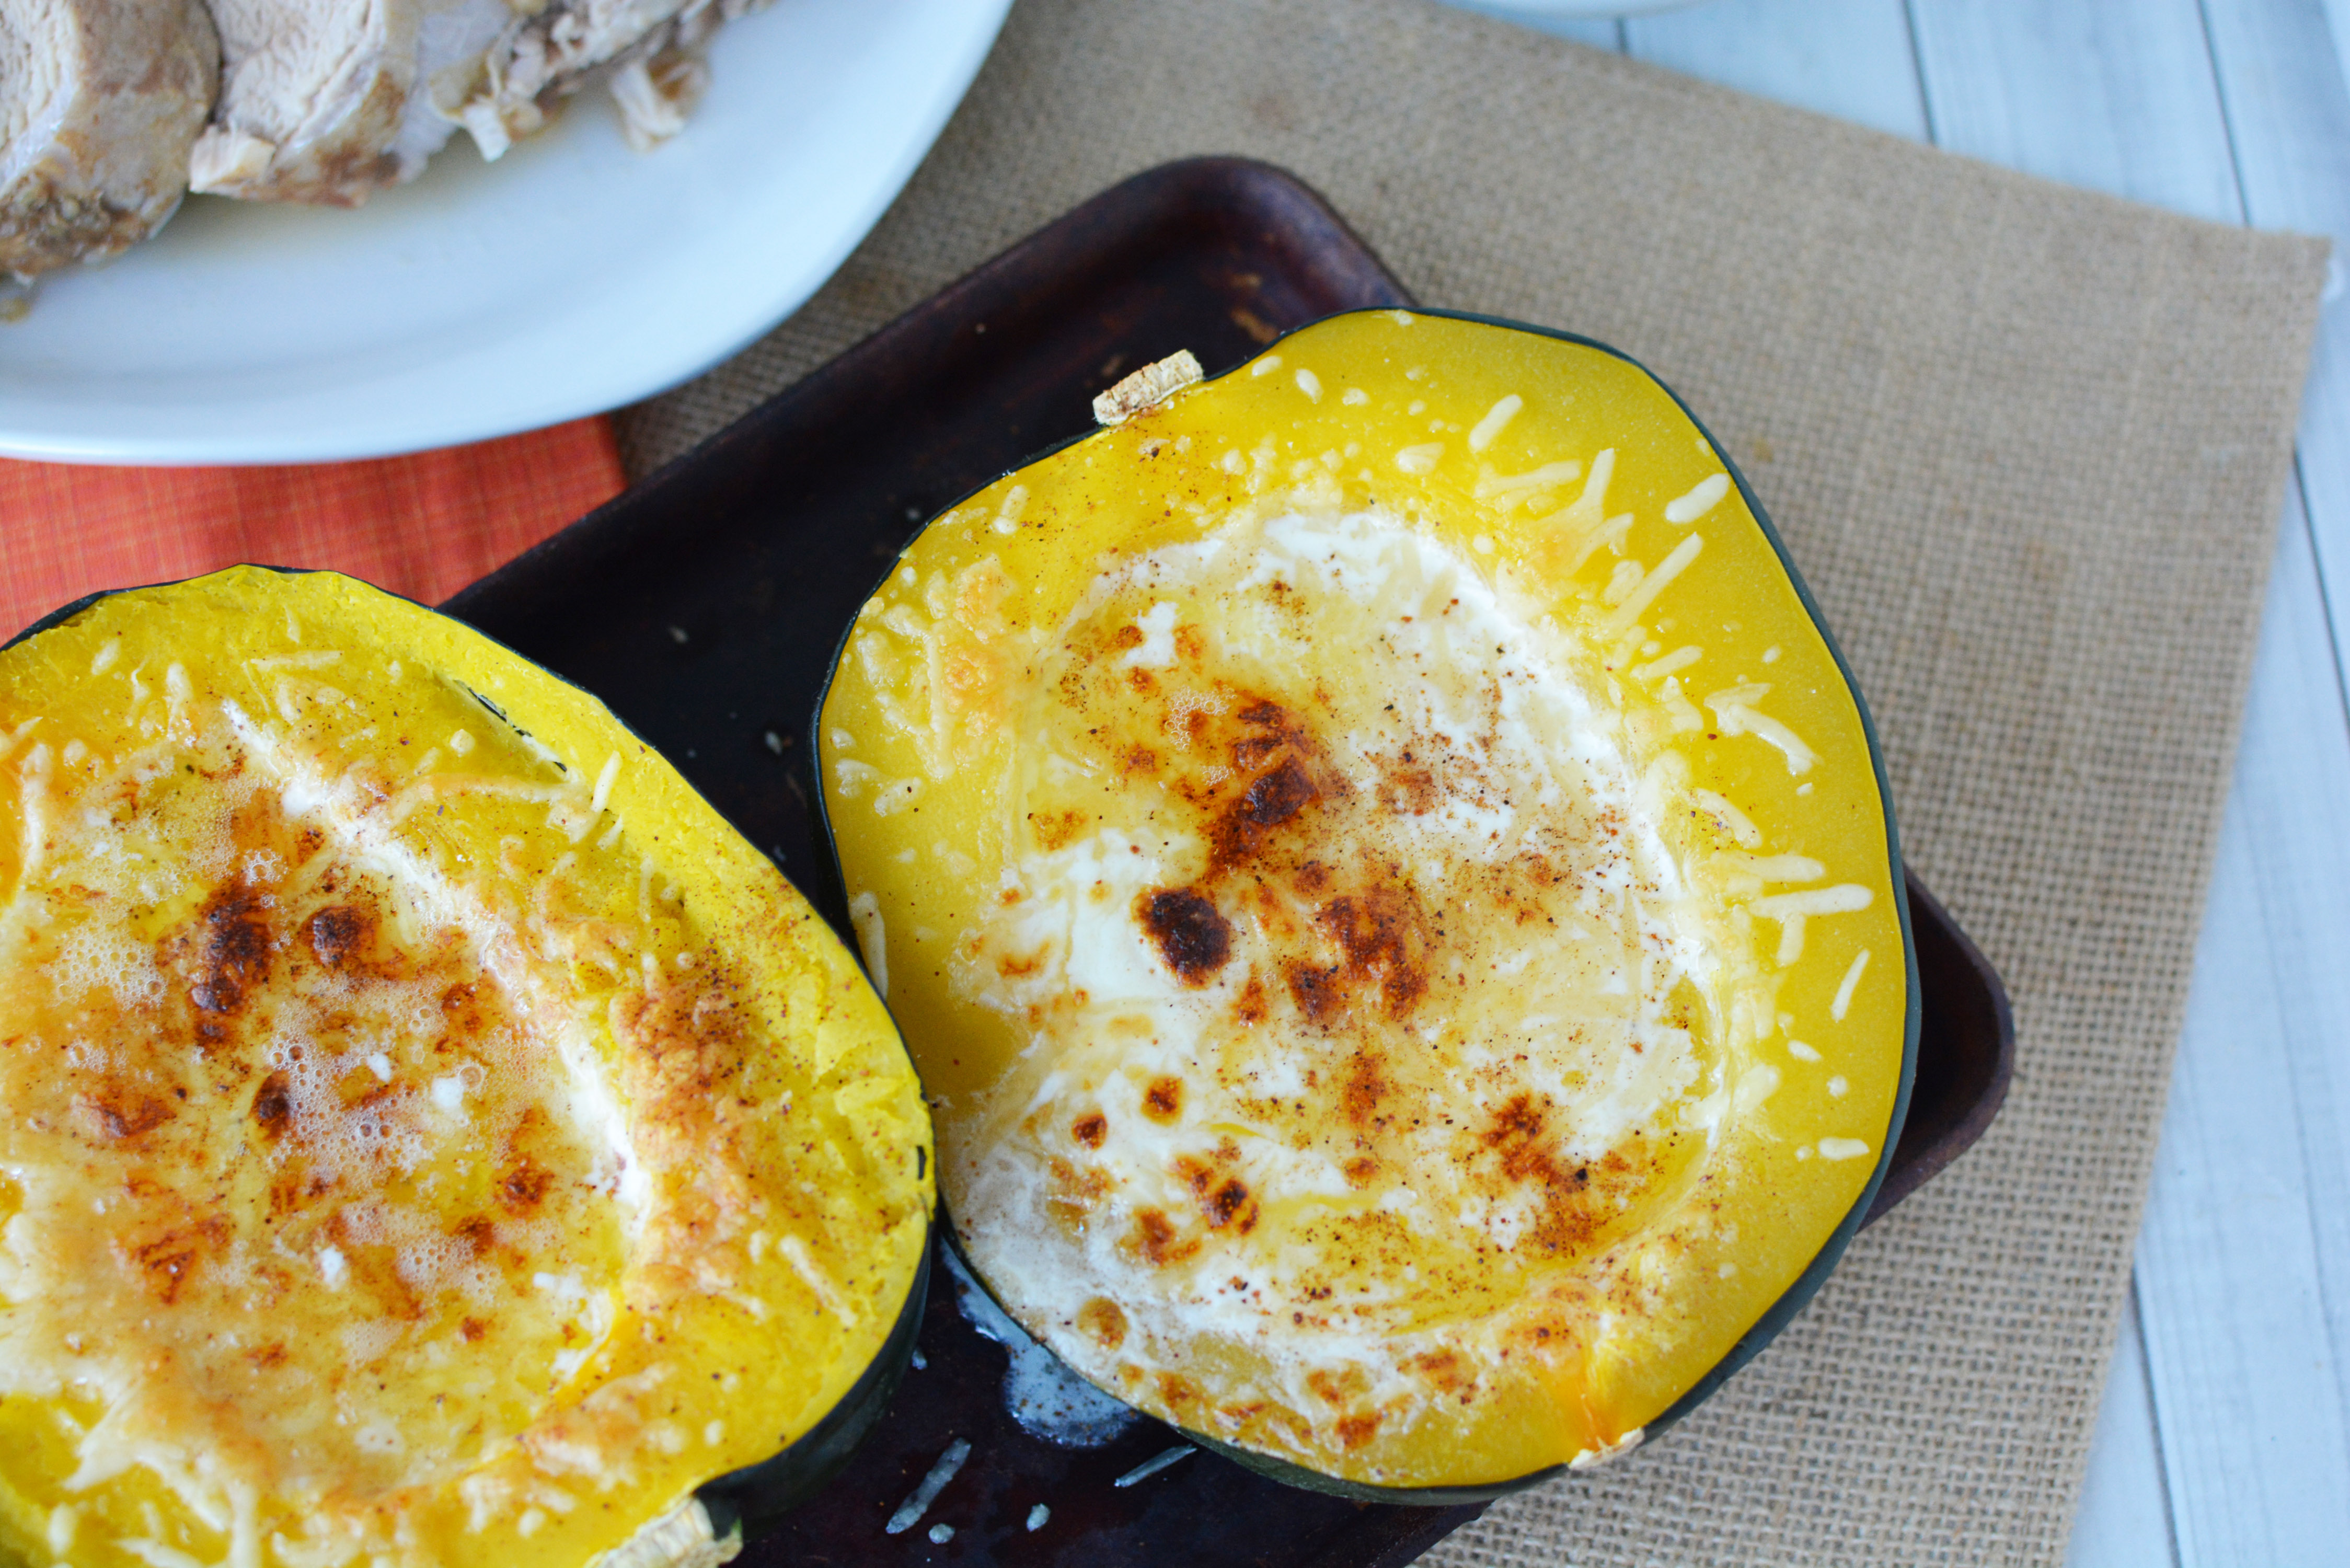 How to make an baked acorn squash dish with butter and cream|Ripped Jeans and Bifocals